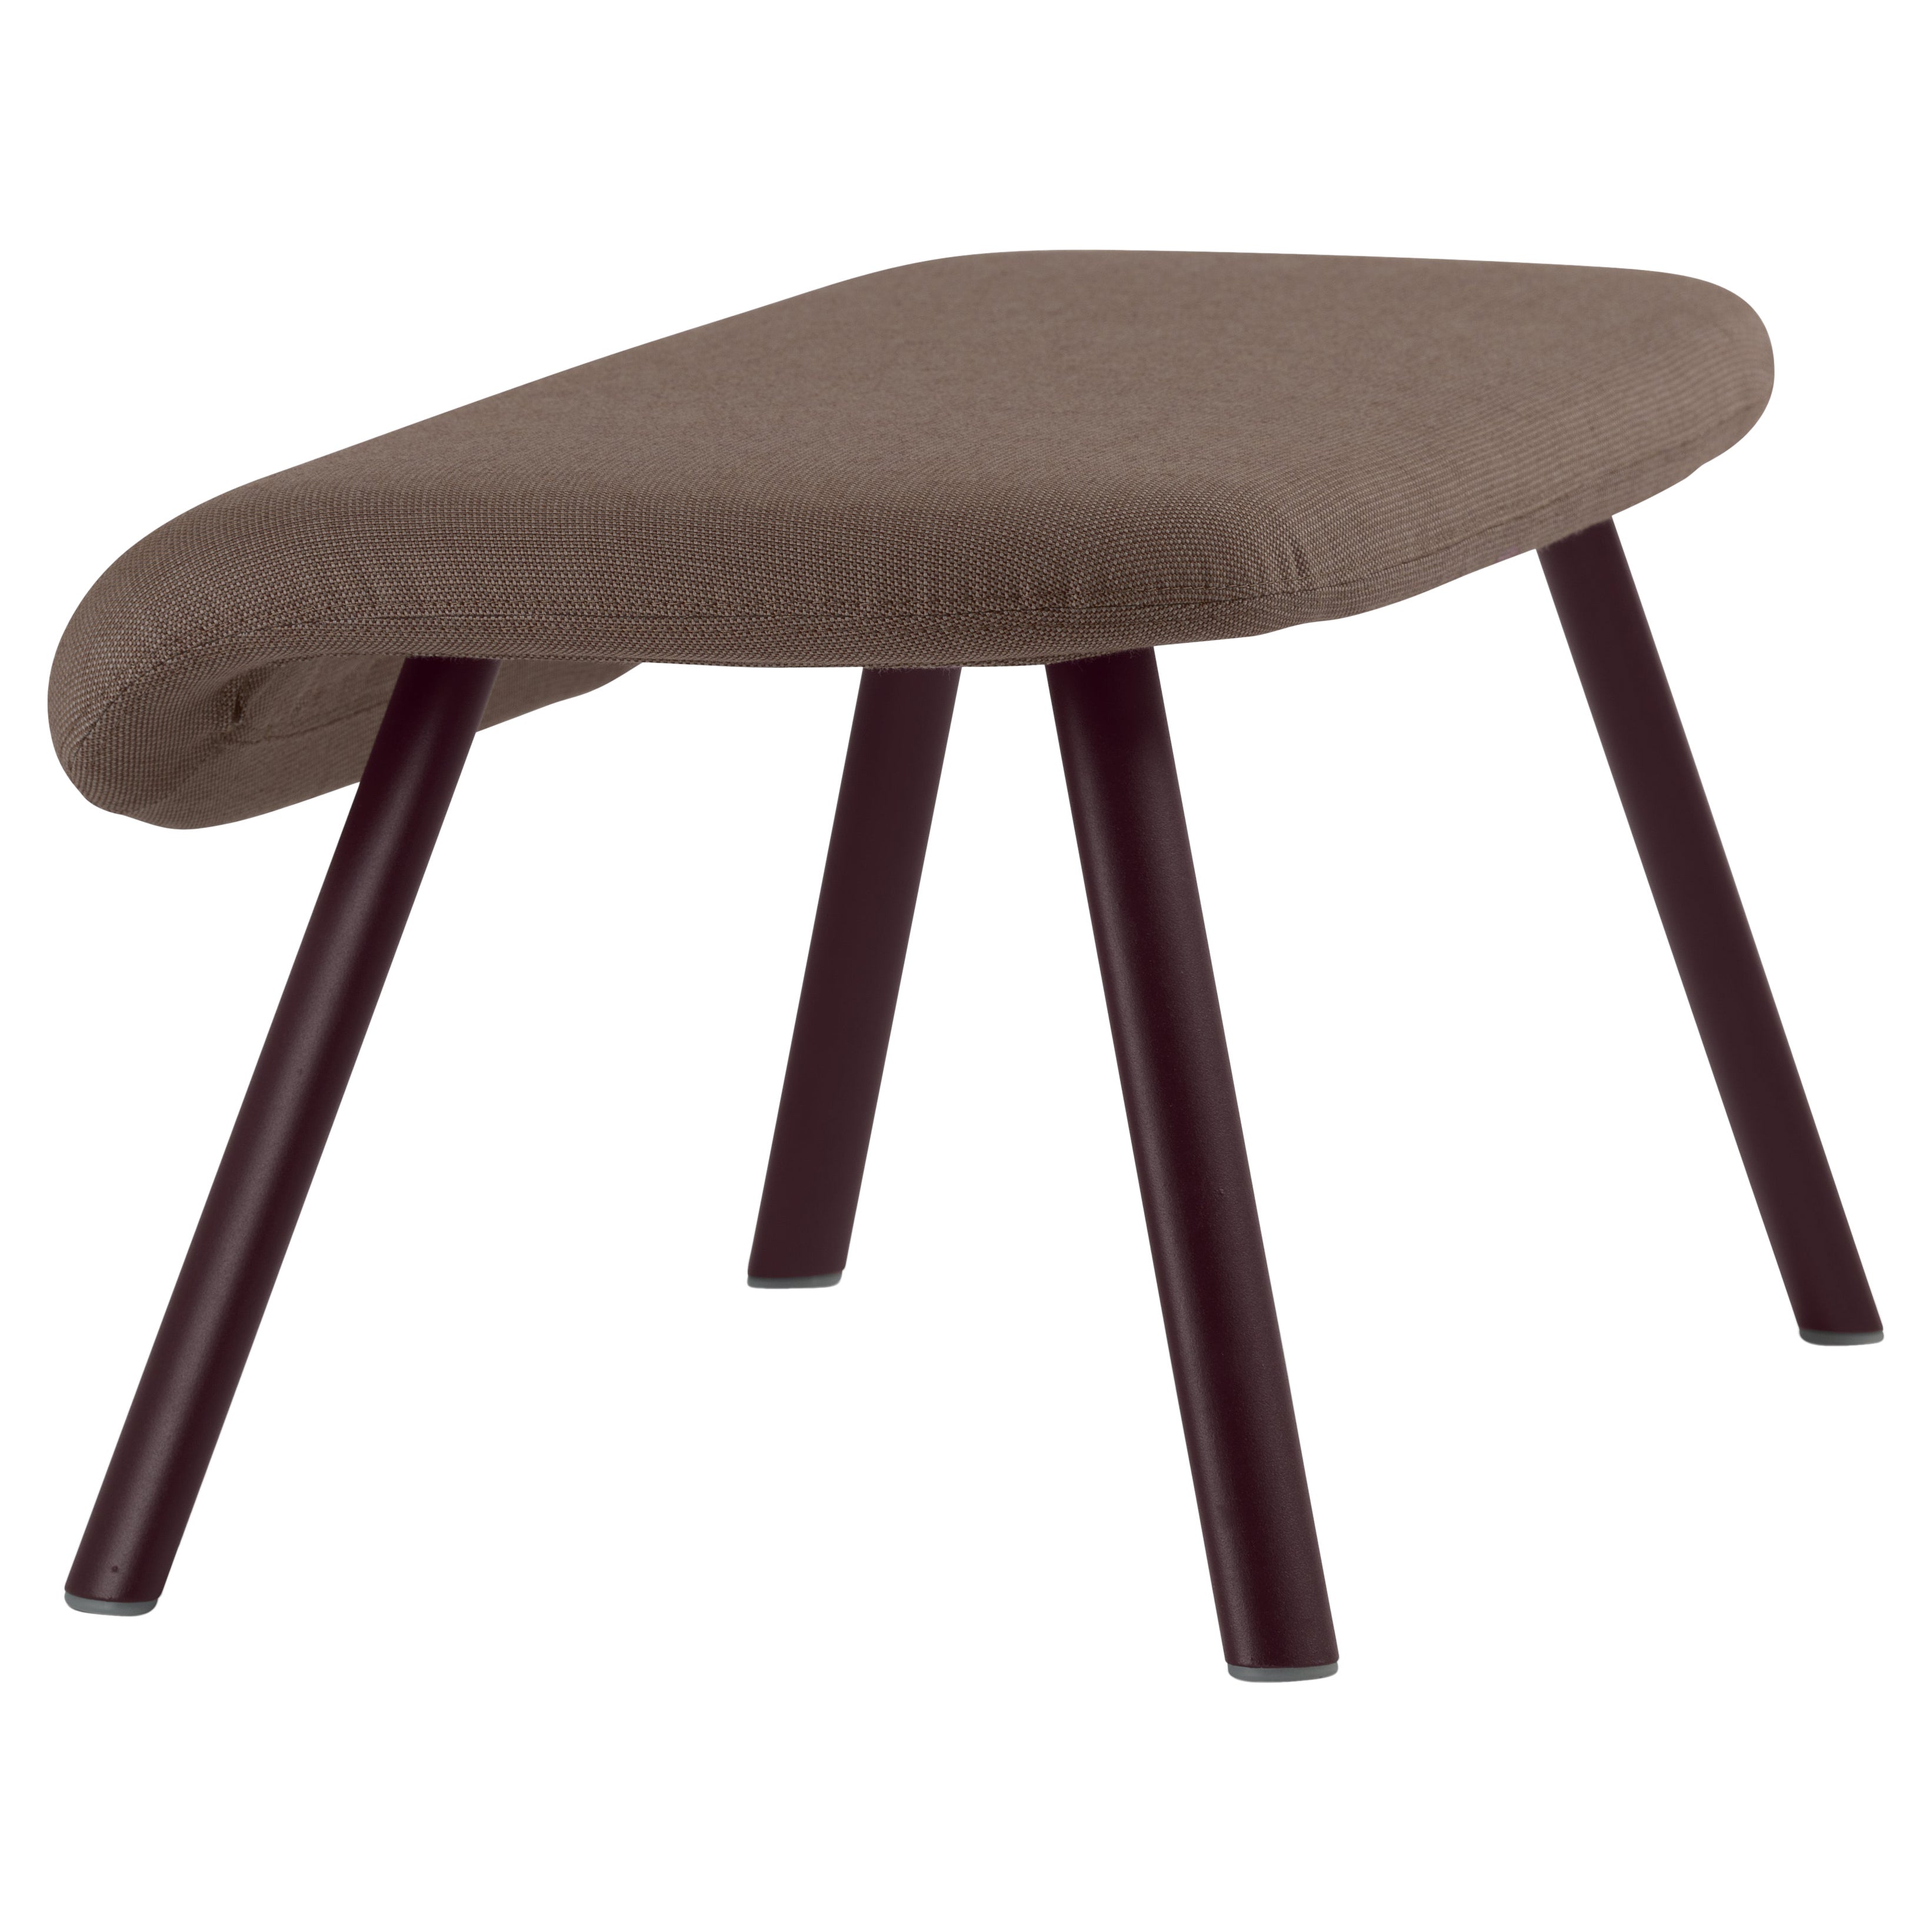 Alias 037 Gran Kobi Pouf in Brown Seat and Lacquered Aluminum Frame For Sale